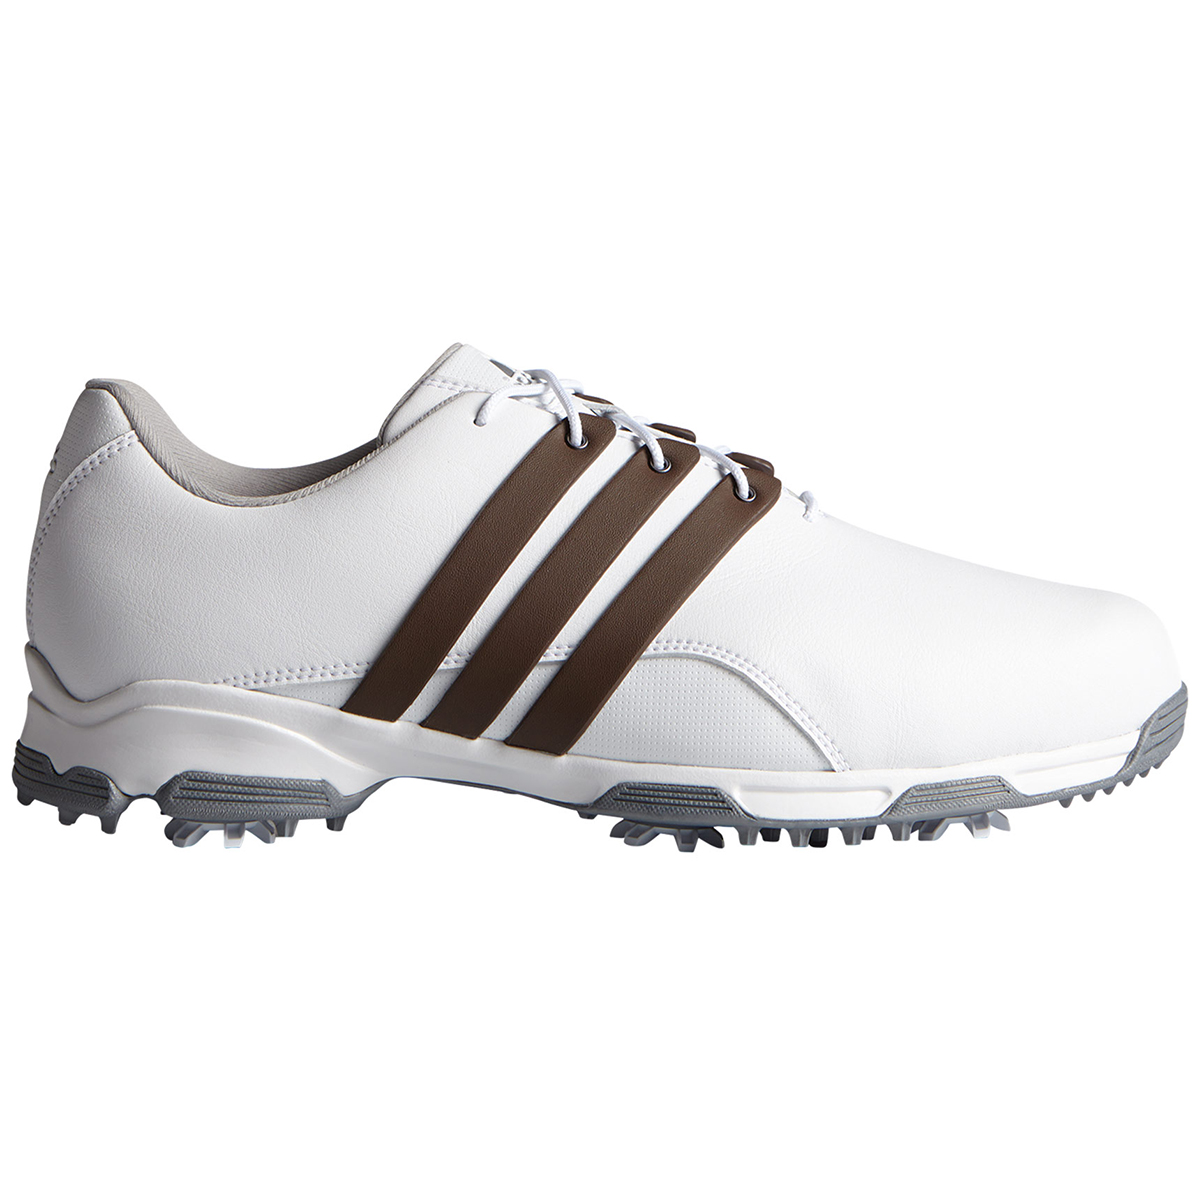 adidas pure traxion golf shoes